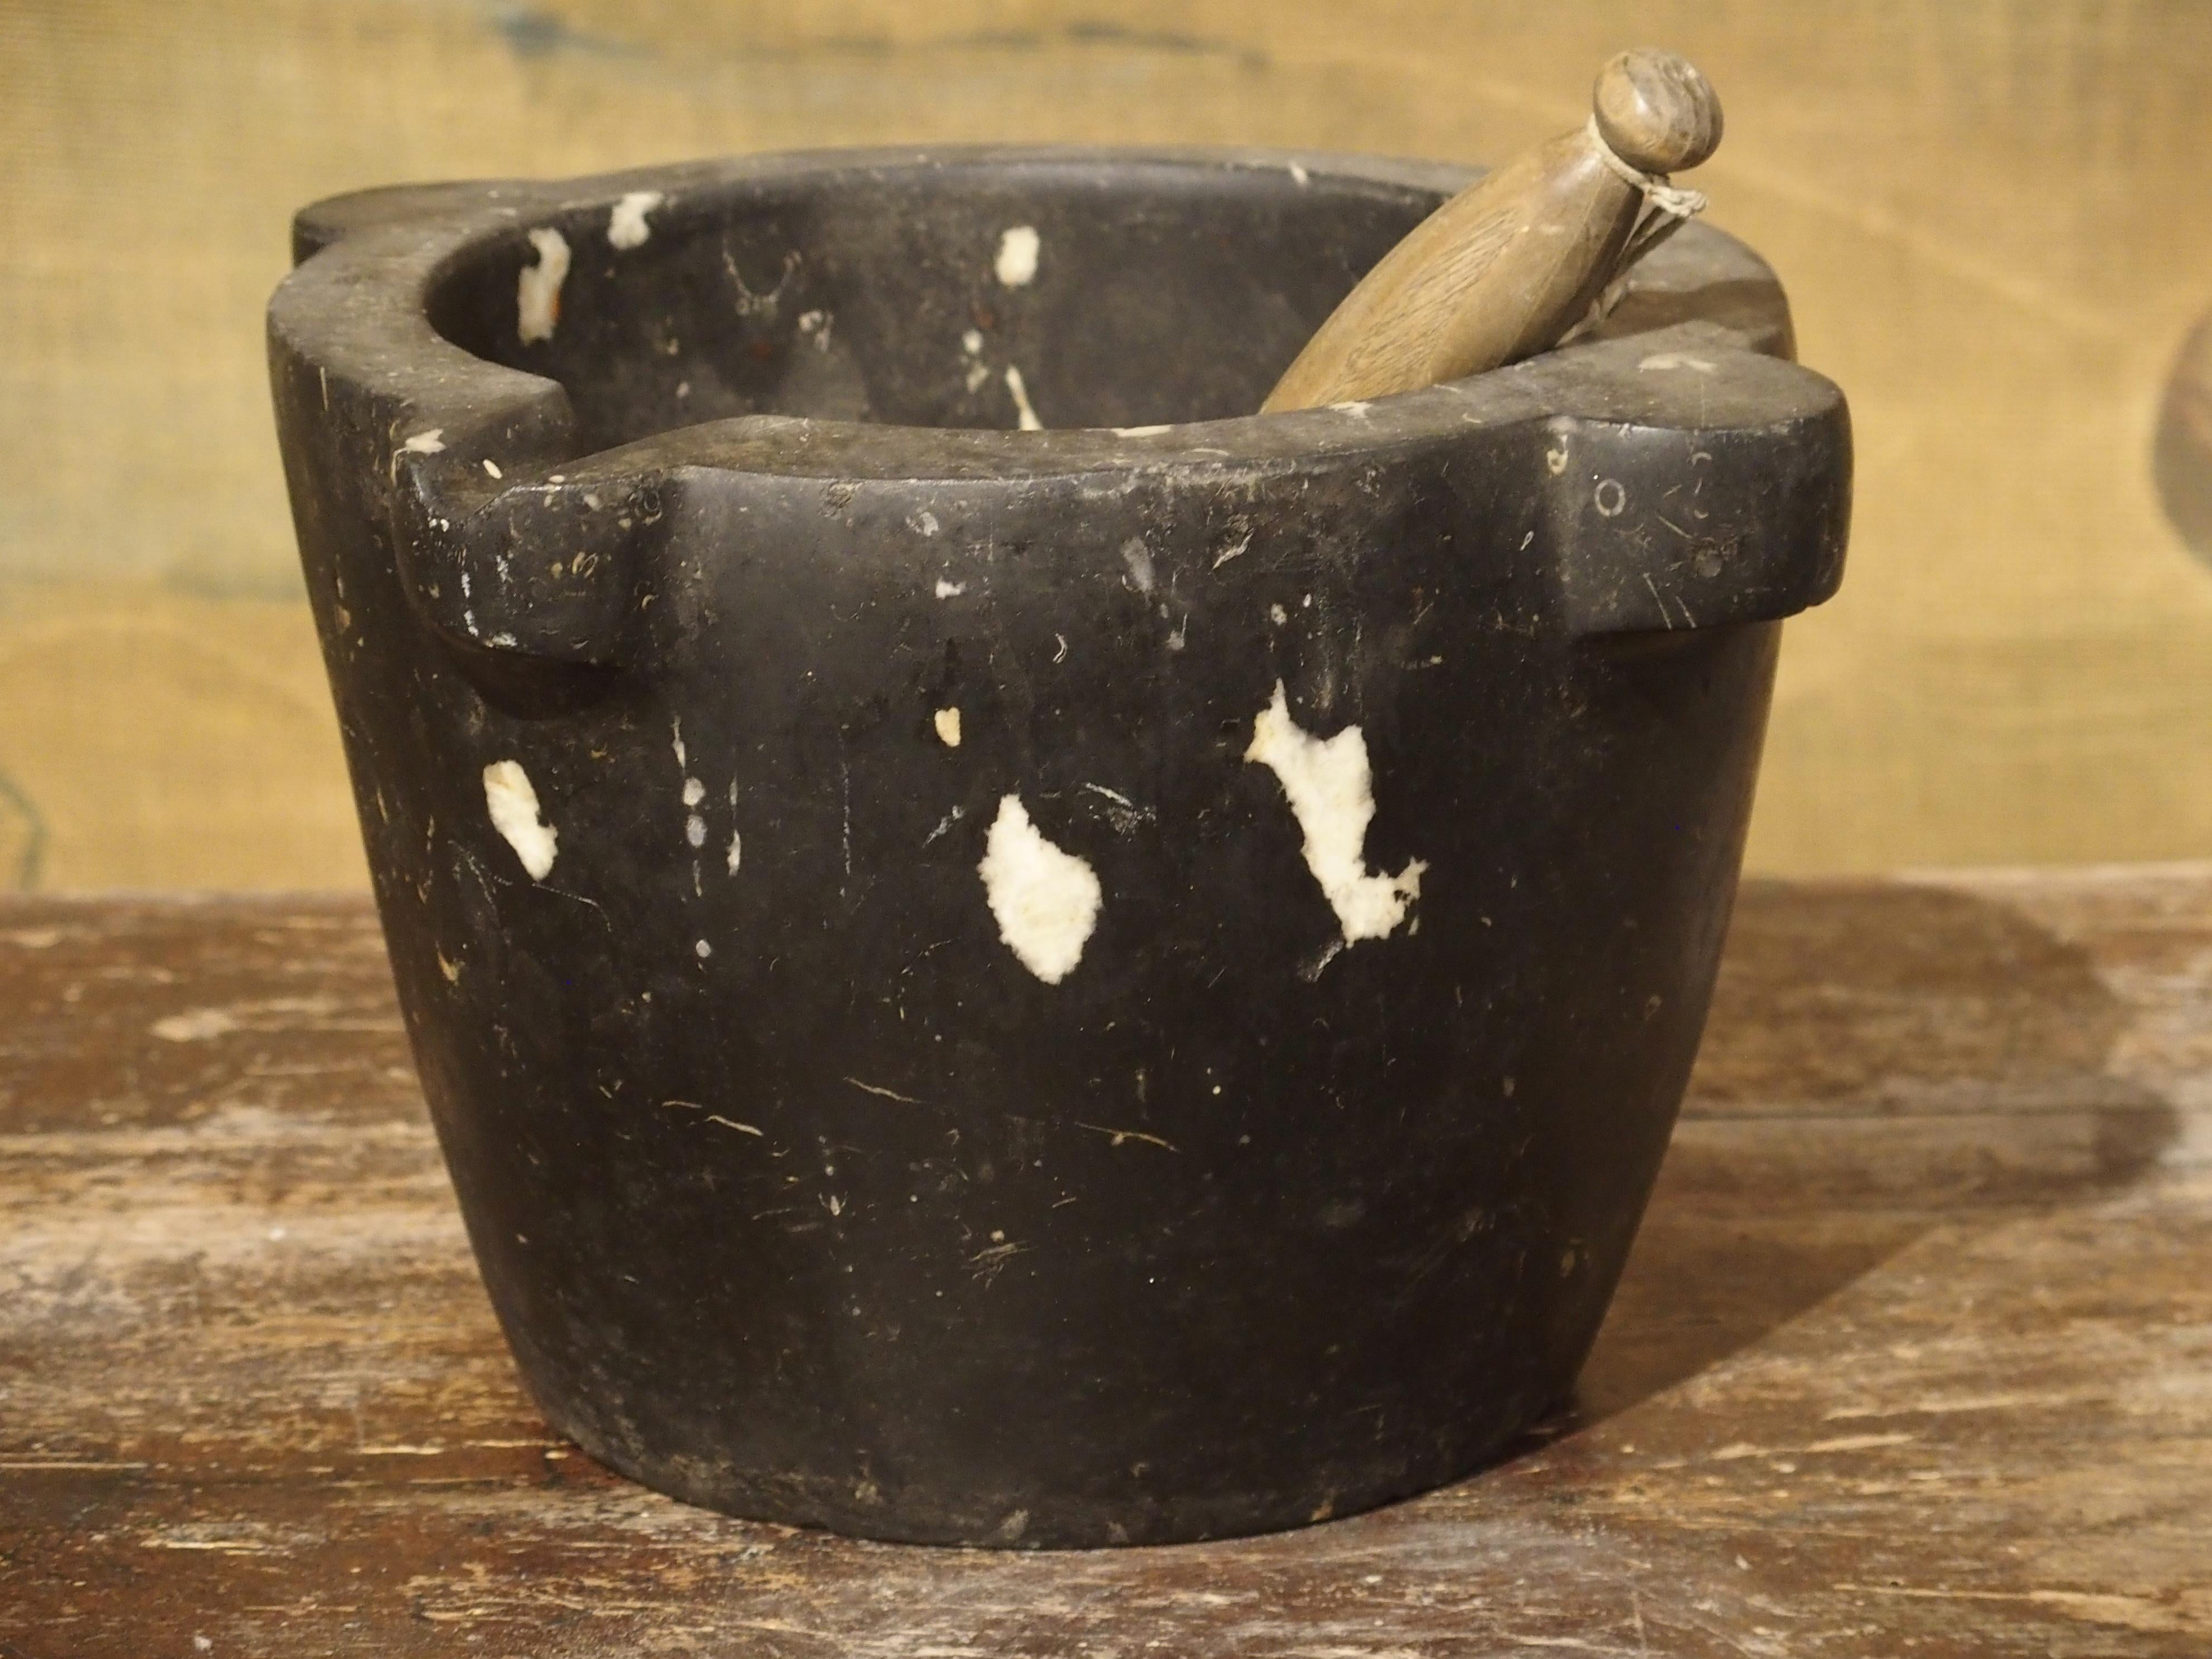 French Antique Black Marble with White Inclusions and Pestle, France, circa 1870